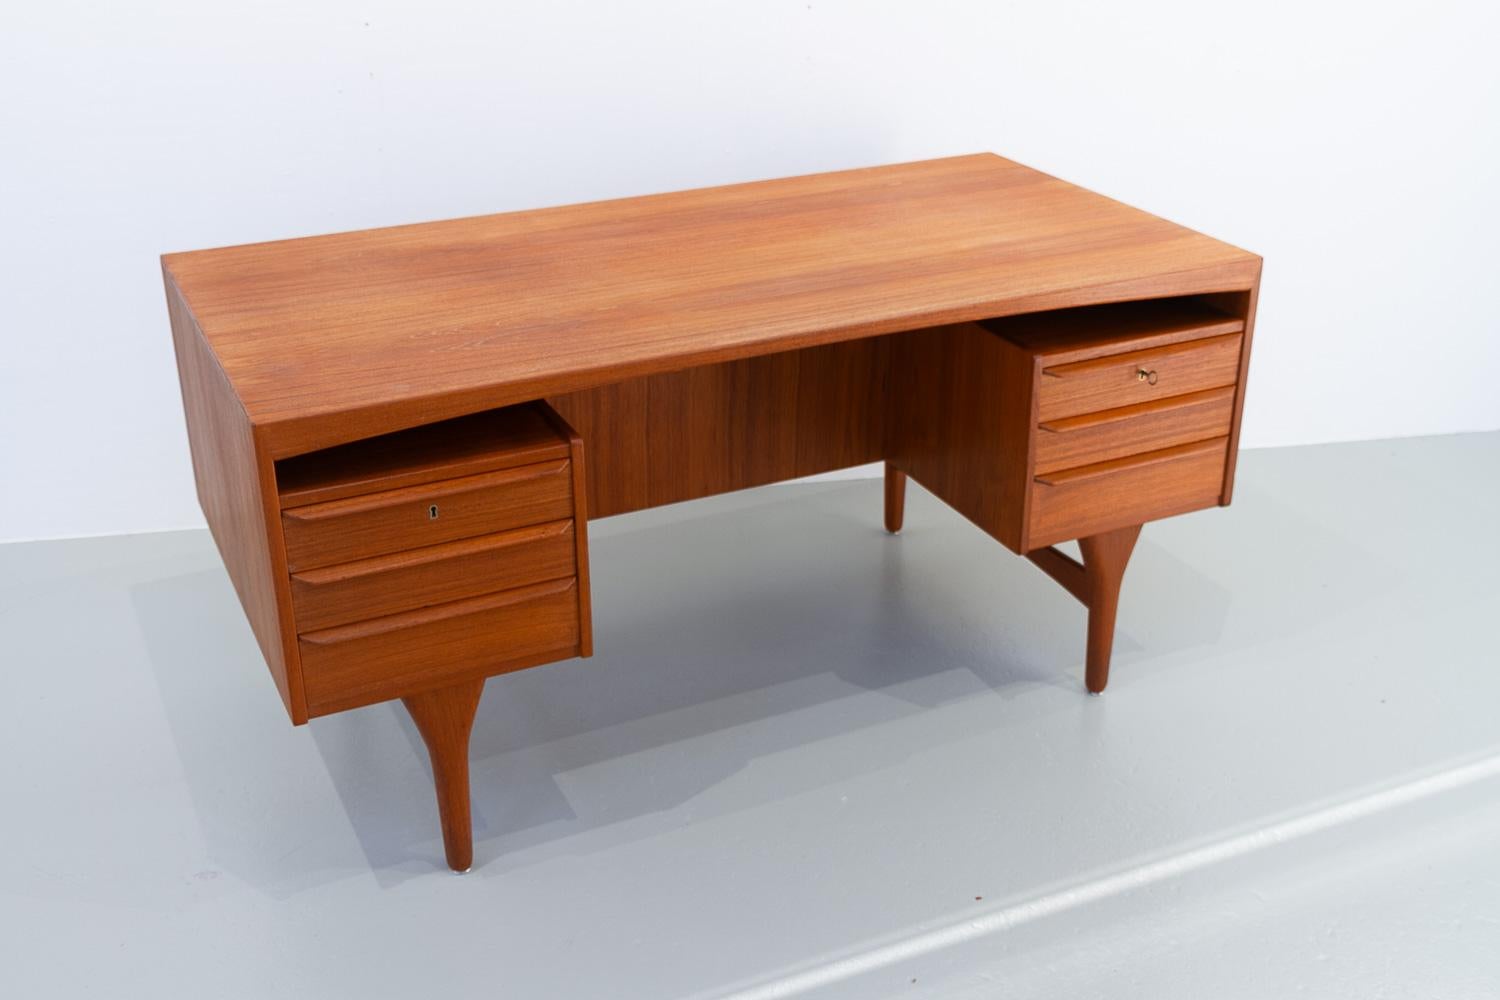 Danish Mid-Century Modern Teak desk by Valdemar Mortensen, 1960s.
High-end freestanding executive teak writing table by Danish master carpenter Valdemar Mortensen from Odense, Denmark.
Table top with arched trim and book matched veneer.
Front with